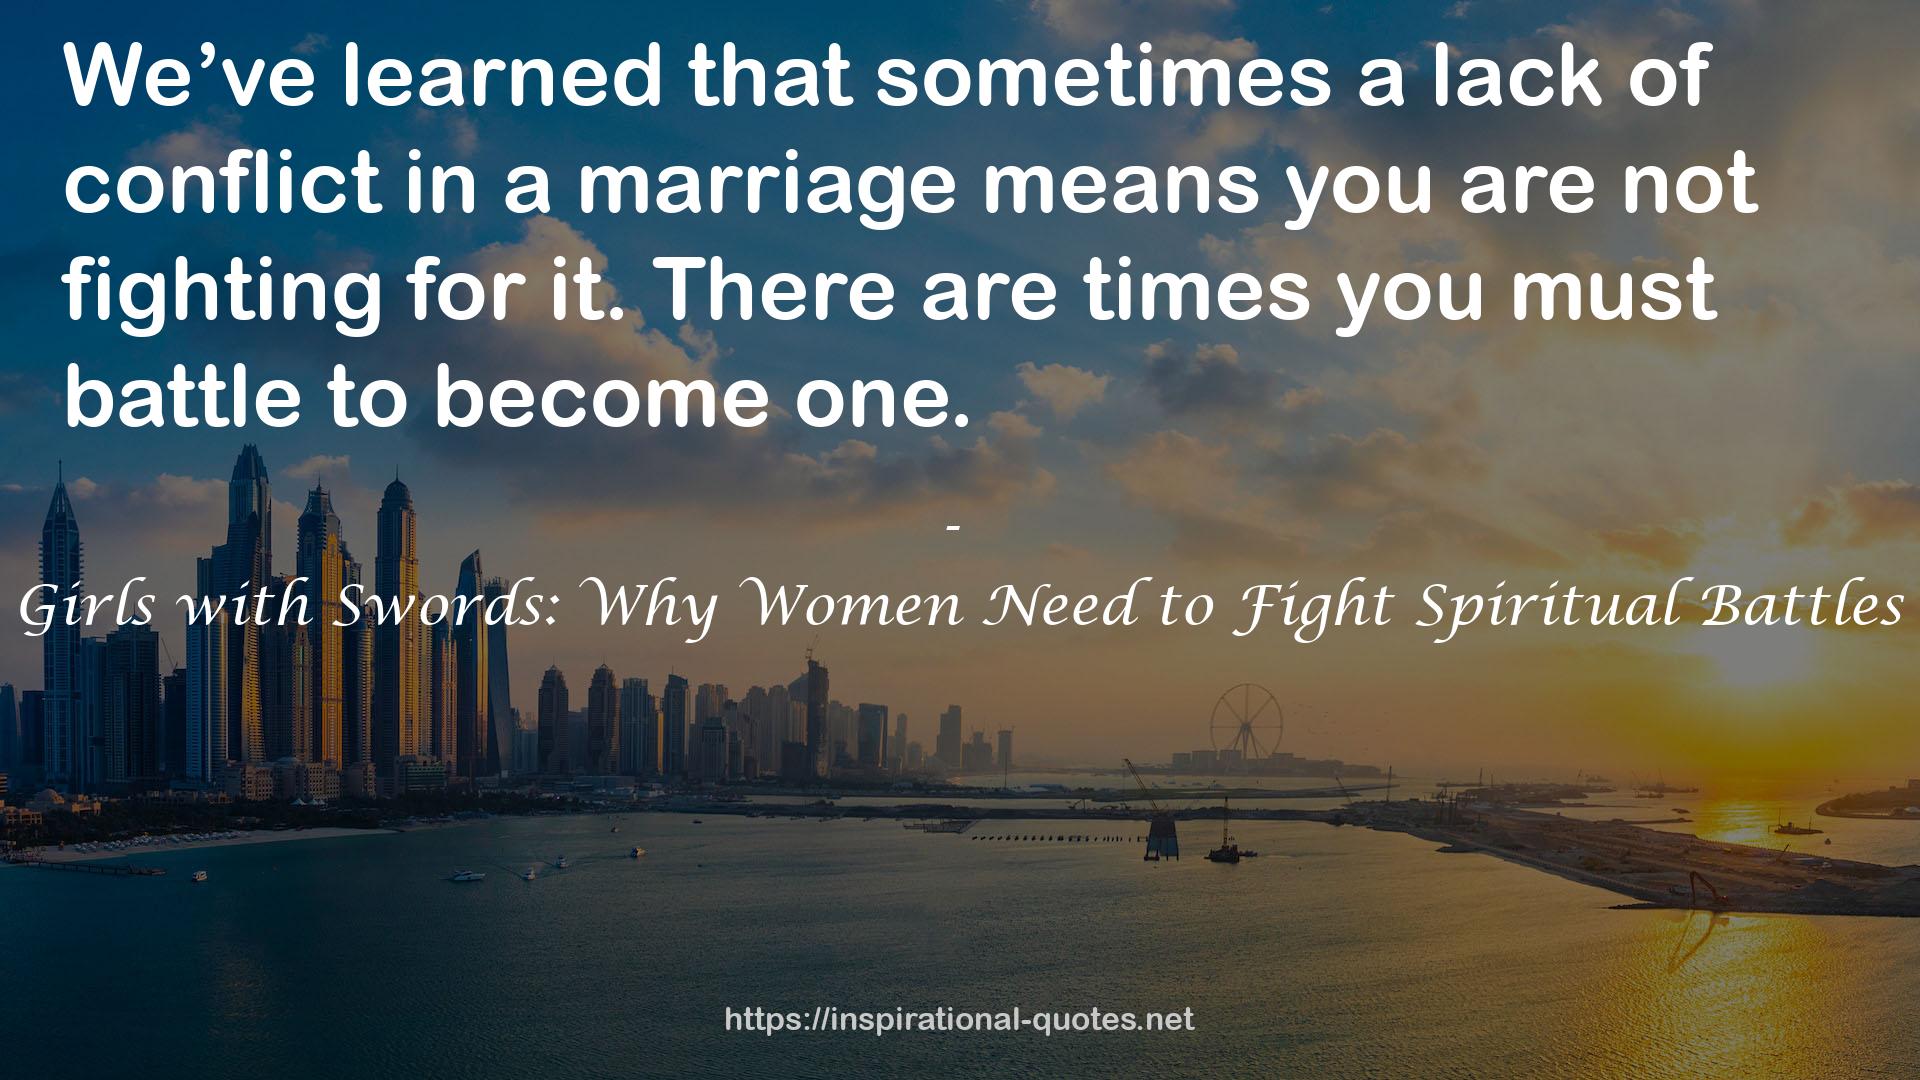 Girls with Swords: Why Women Need to Fight Spiritual Battles QUOTES